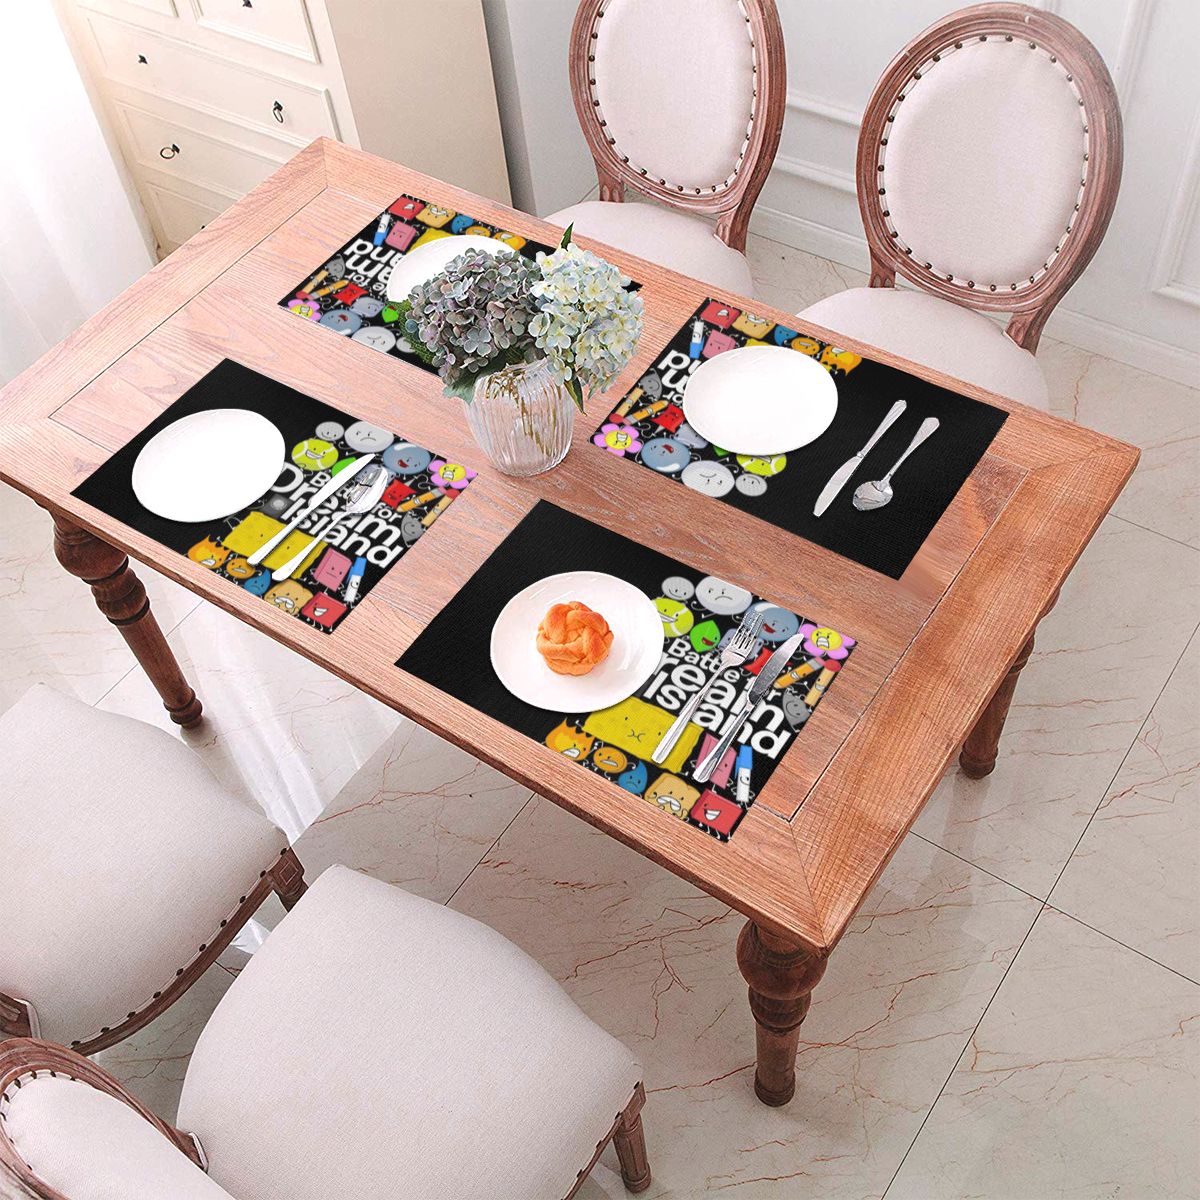 BFDI Poster Black Placemat Beautiful Match with Dark Wood Table Suitable for Barbecue Washable 5 - BFDI Plush